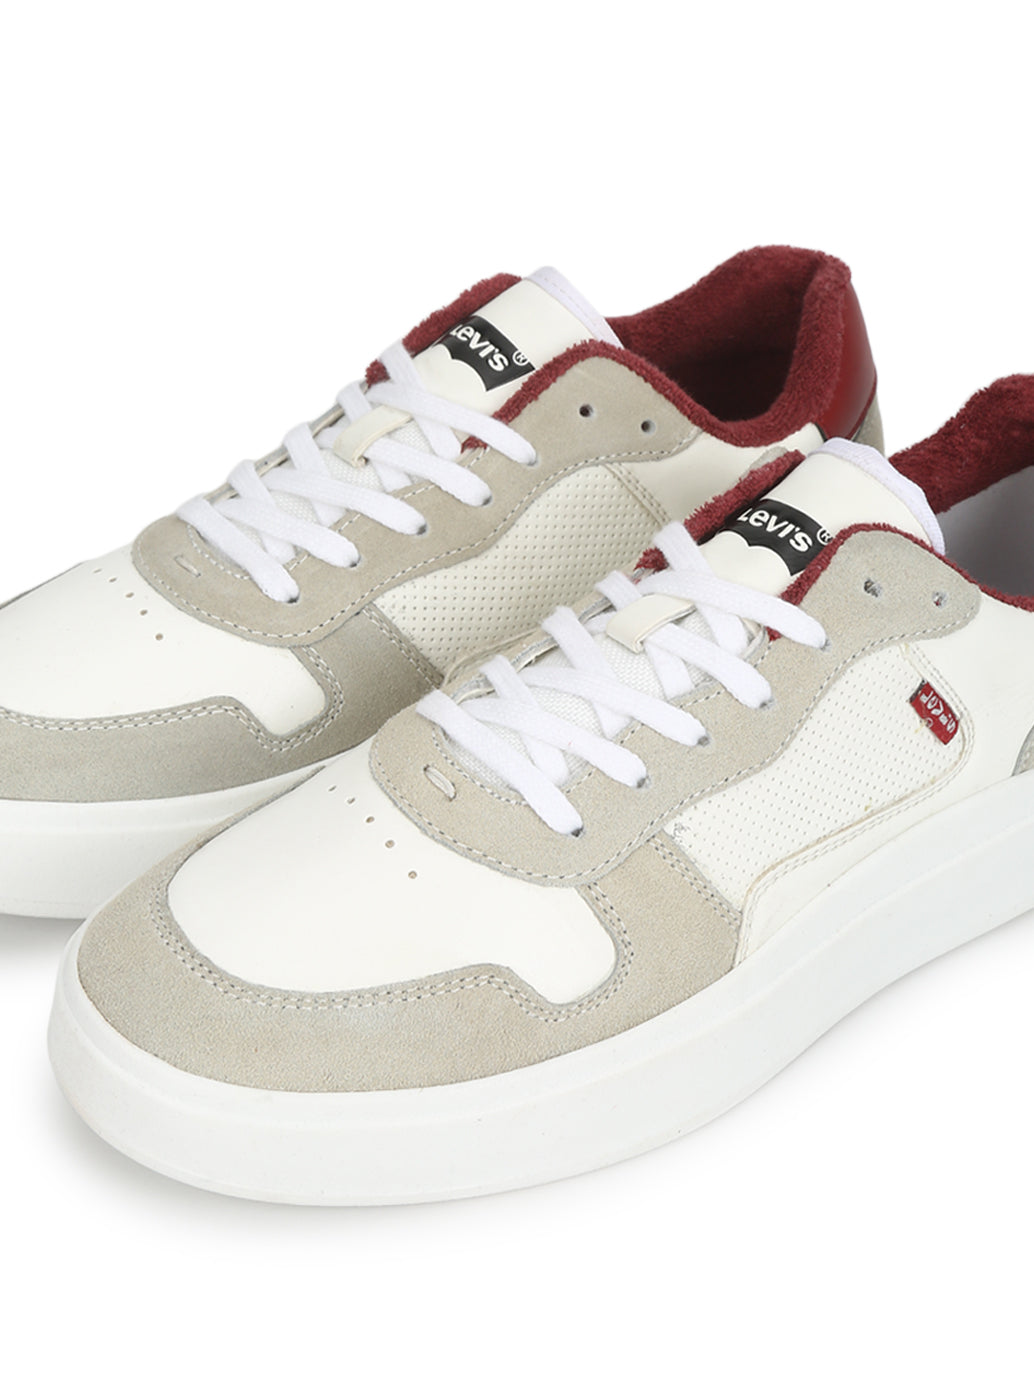 Men's Court Off White Casual Sneakers